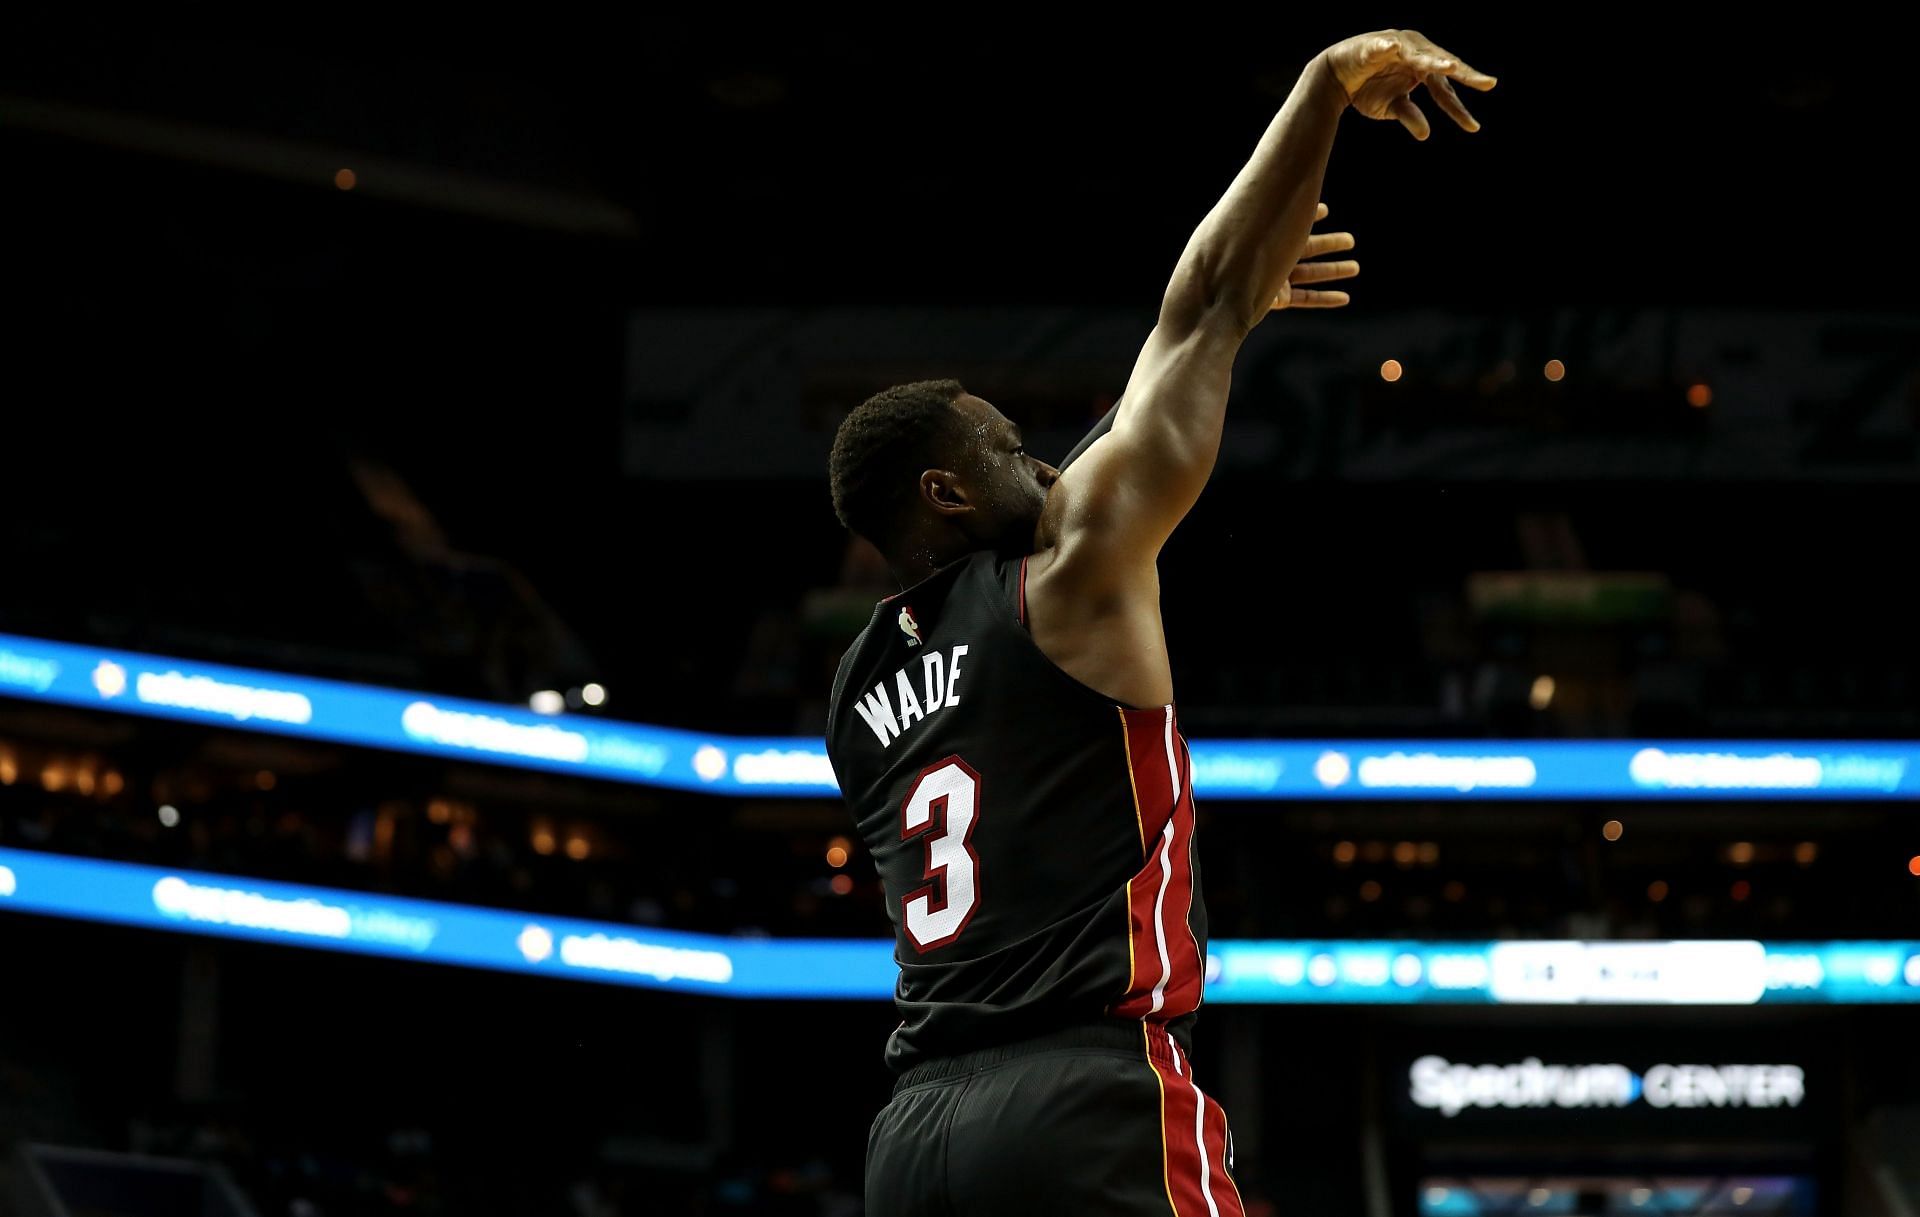 Dwyane Wade #3 of the Miami Heat shoots the ball against the Charlotte Hornets during their game at Spectrum Center on October 2, 2018 in Charlotte, North Carolina.